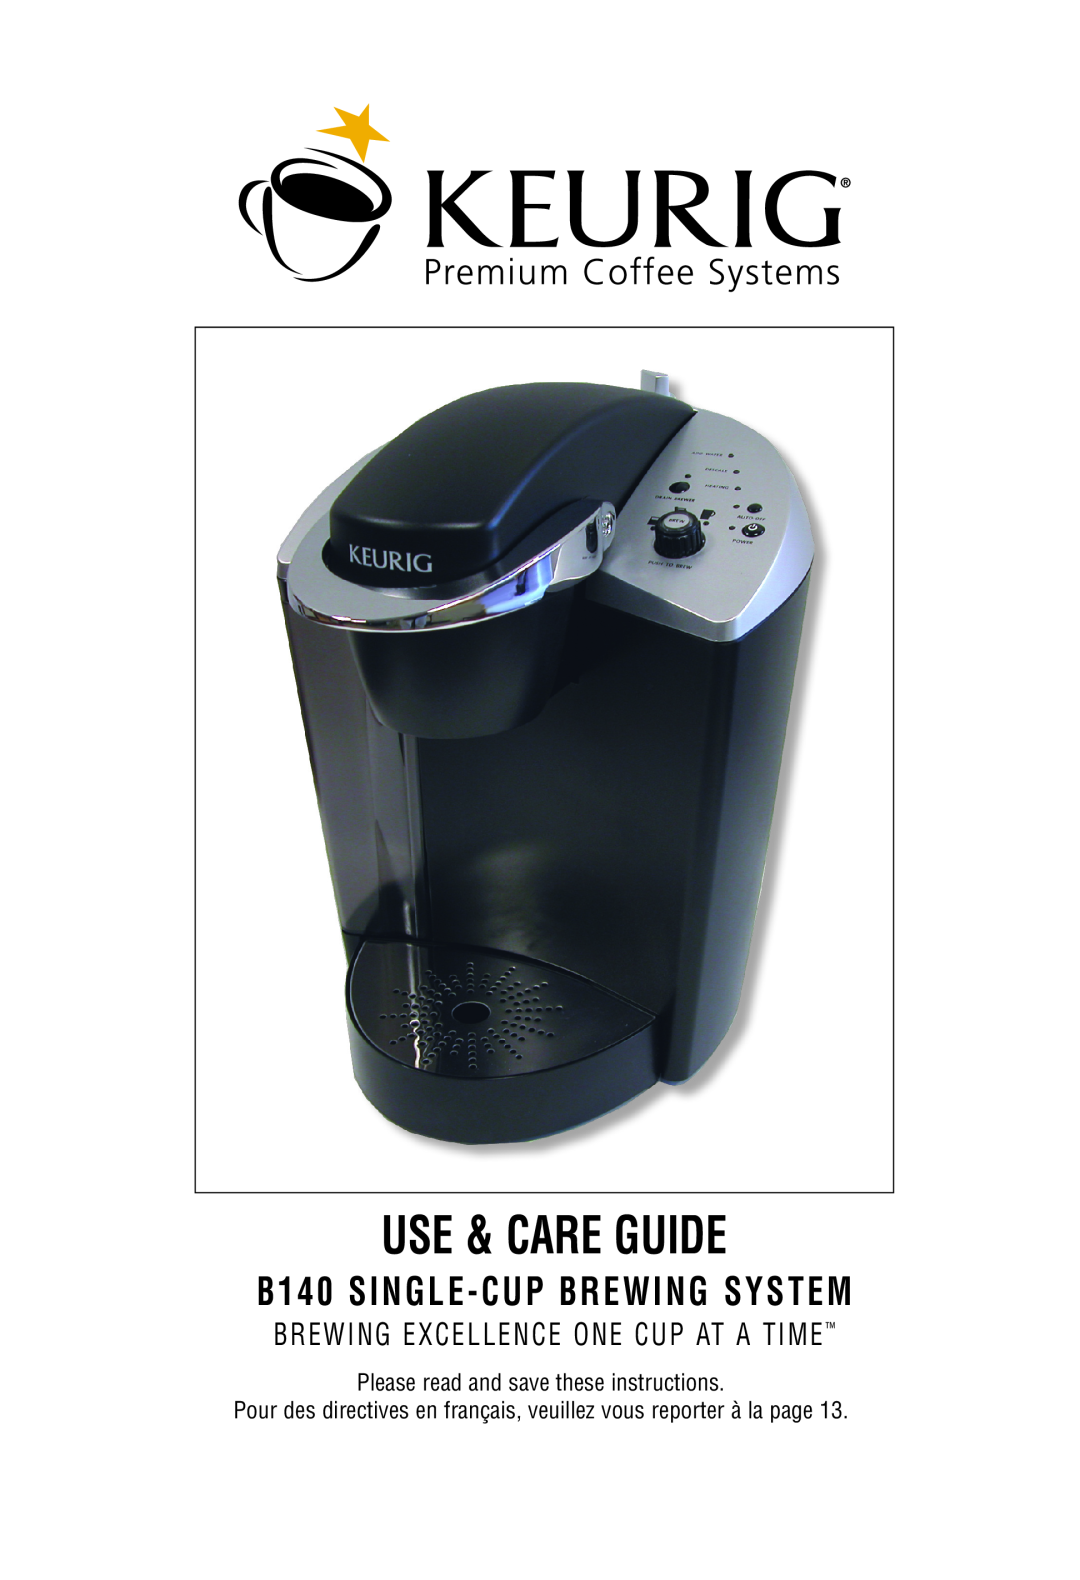 Keurig manual Use & Care Guide, B140 SINGLE - CUP BREWING SYSTEM, Please read and save these instructions 